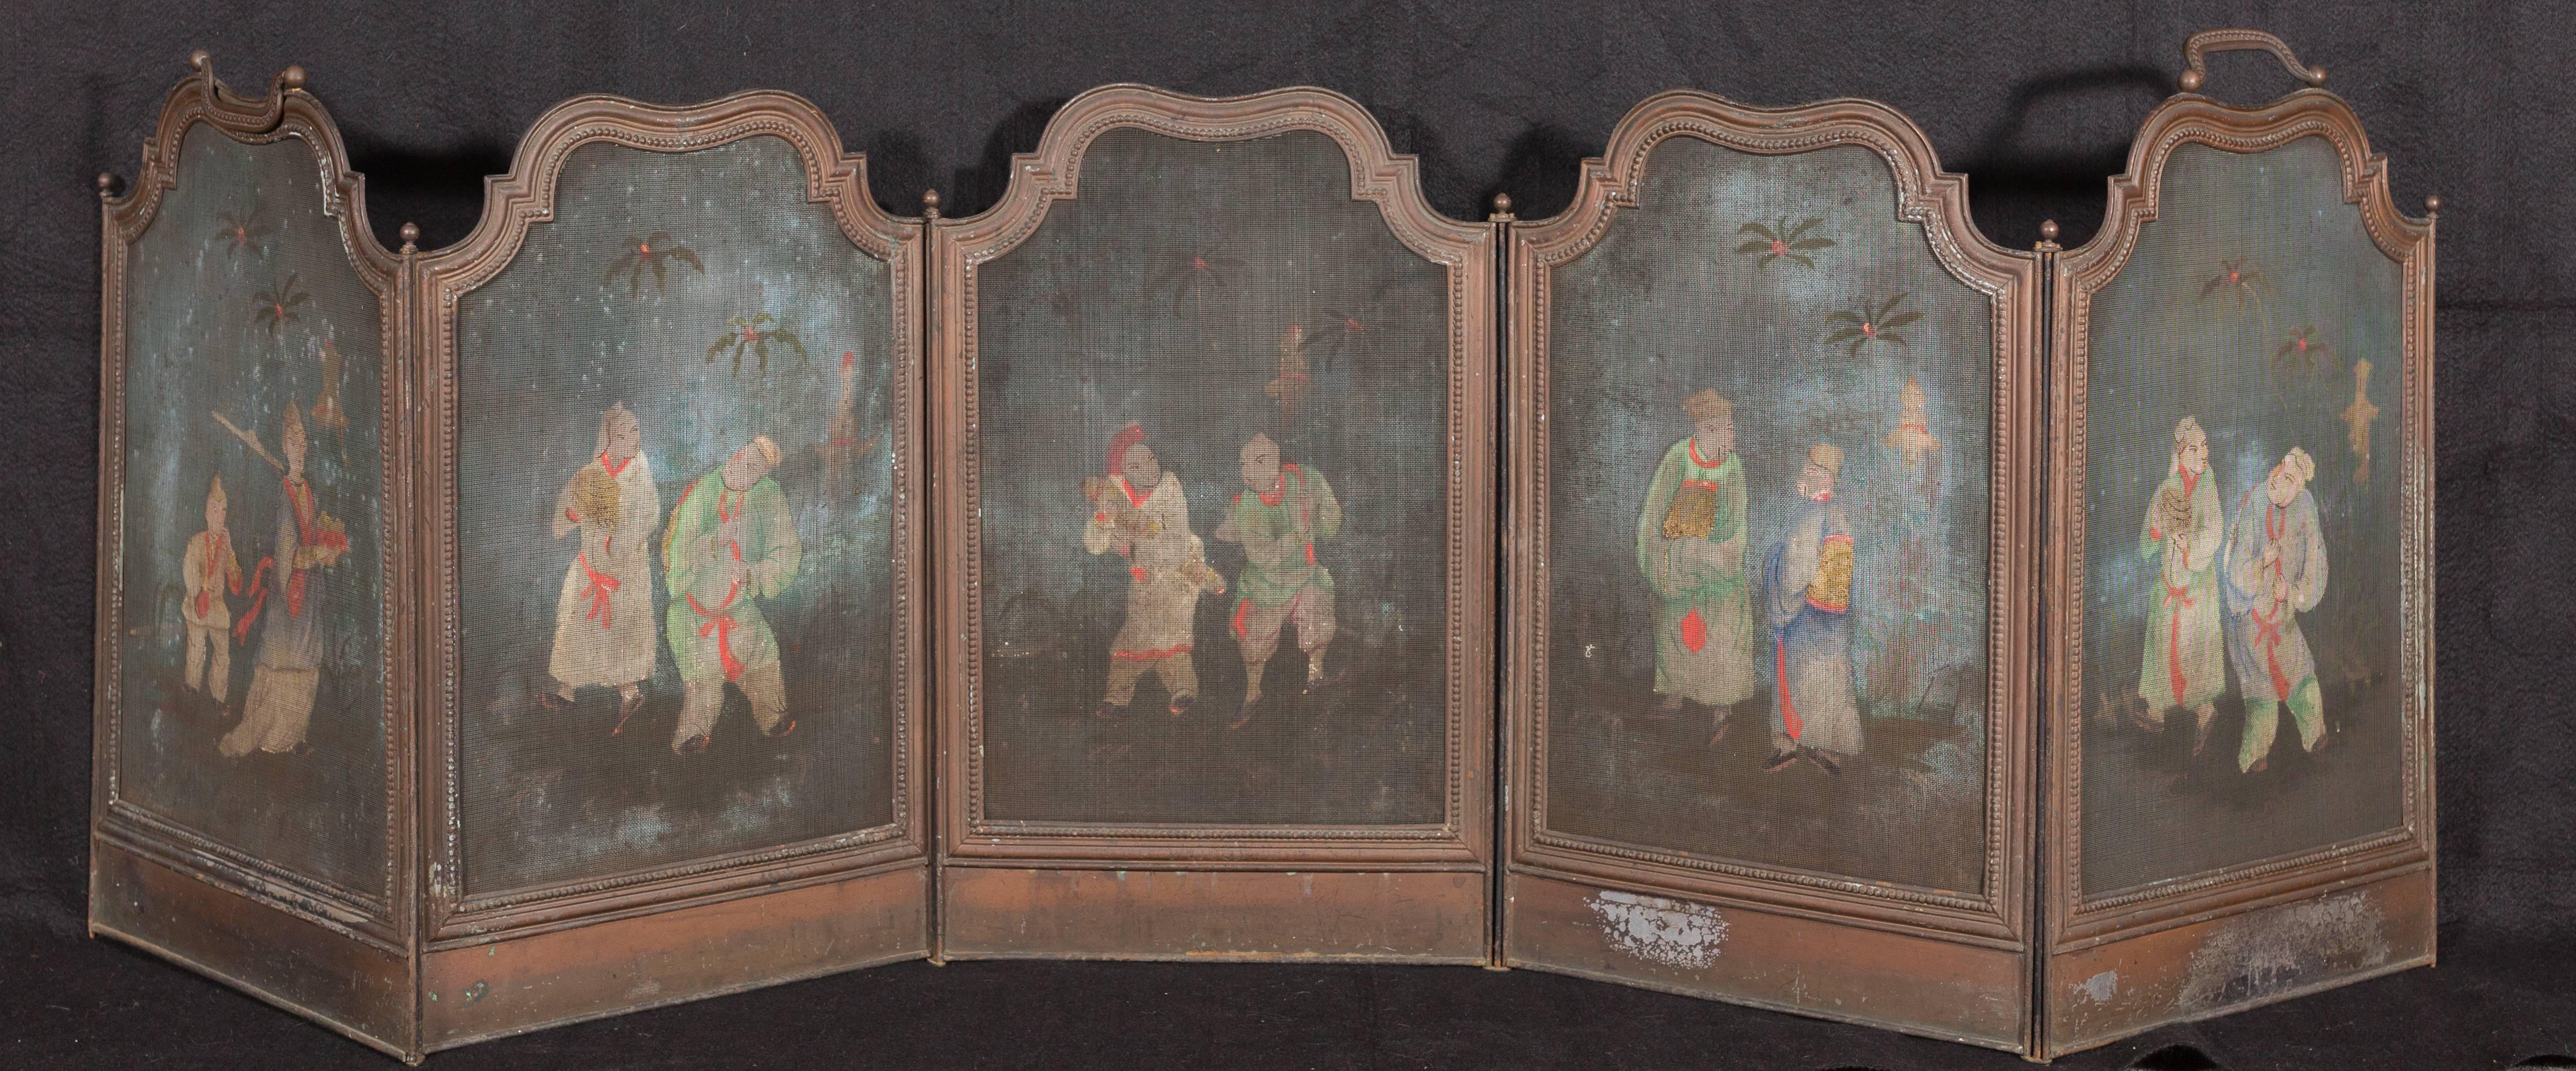 Fire screen with original figures painted on screens.